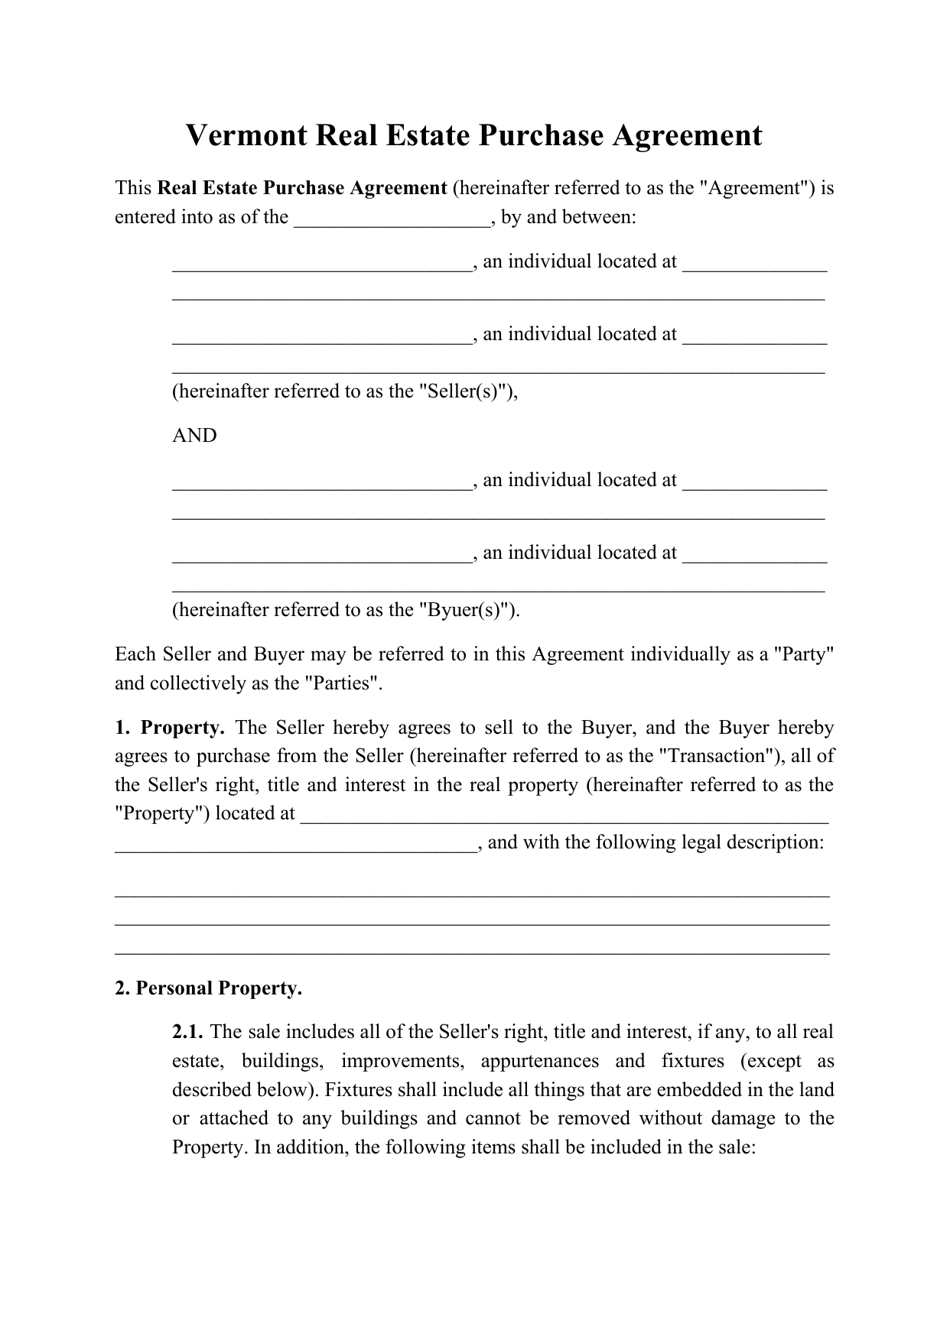 Real Estate Purchase Agreement Template - Vermont, Page 1